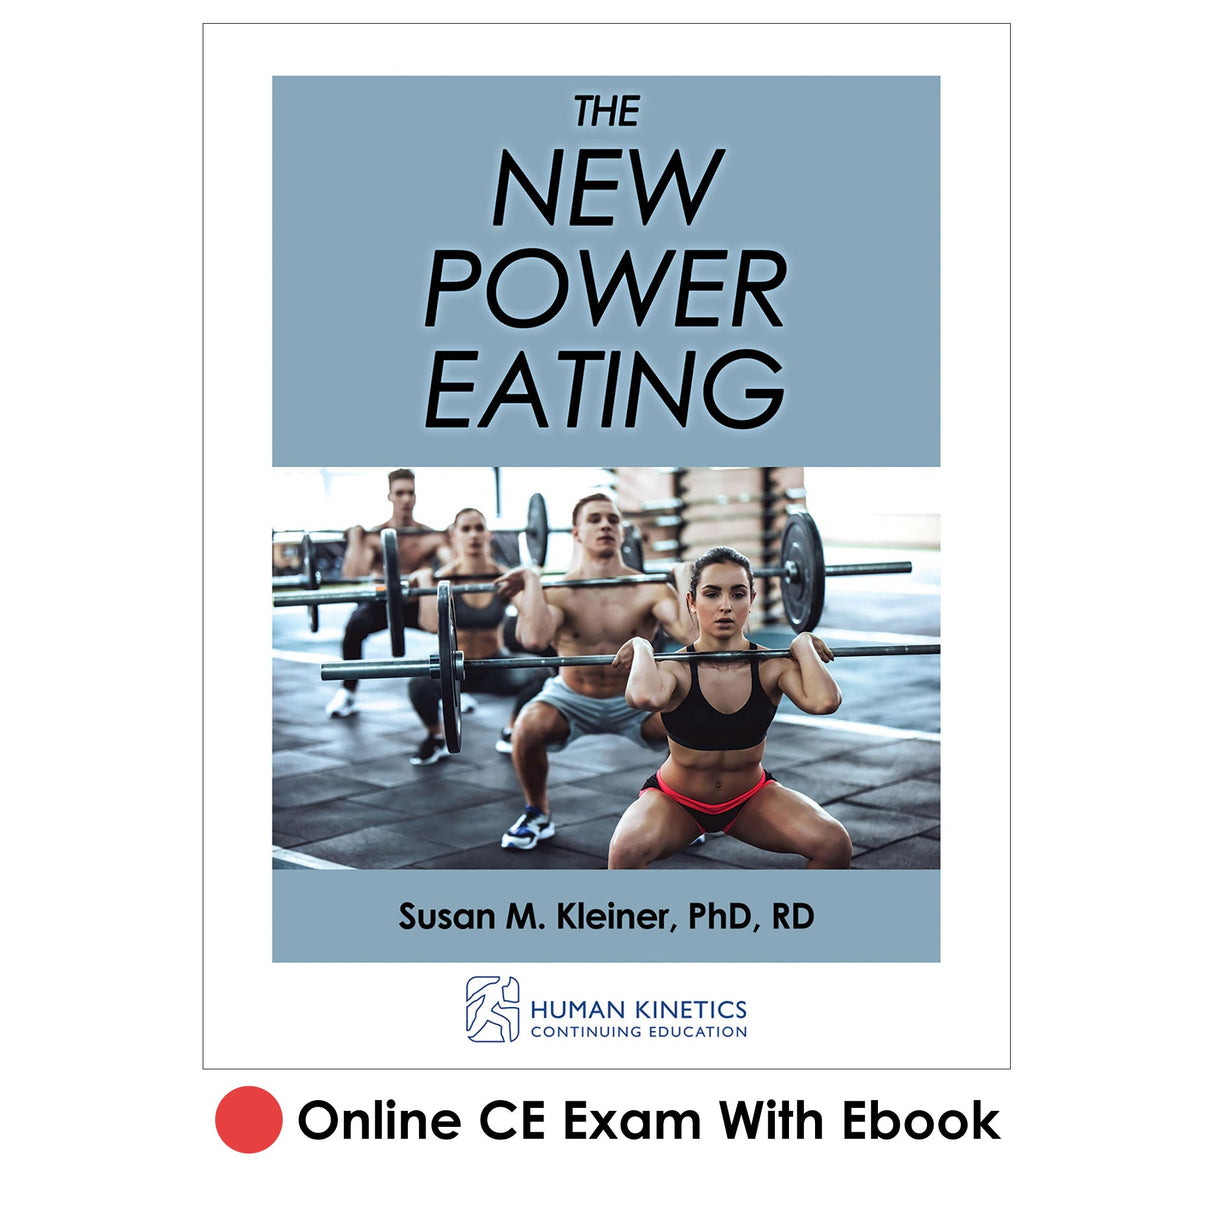 New Power Eating Online CE Exam With Ebook, The